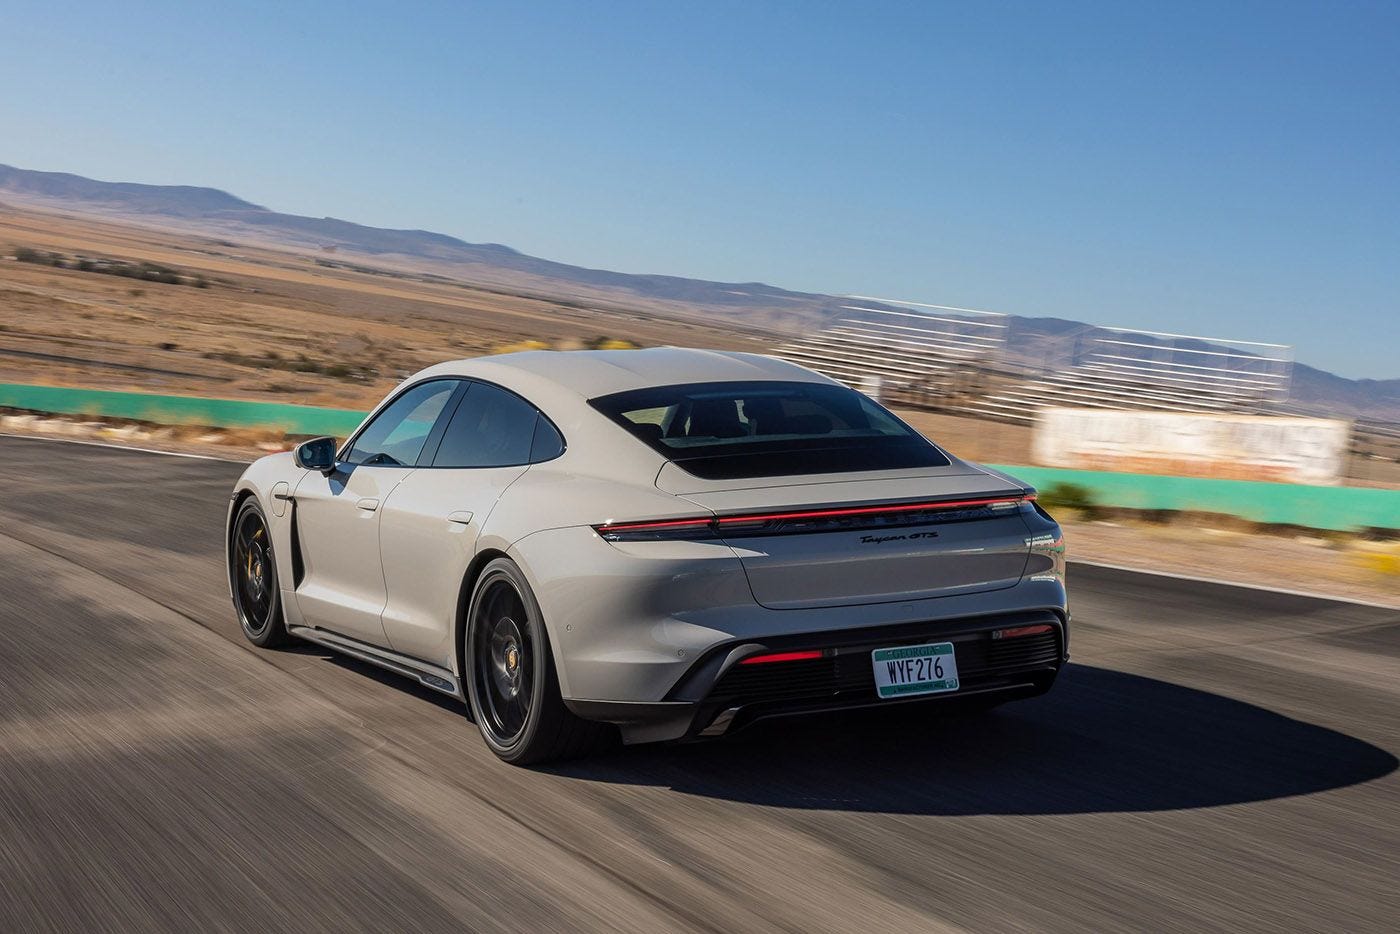 2023 Porsche Taycan Gains Range and Faster Charging